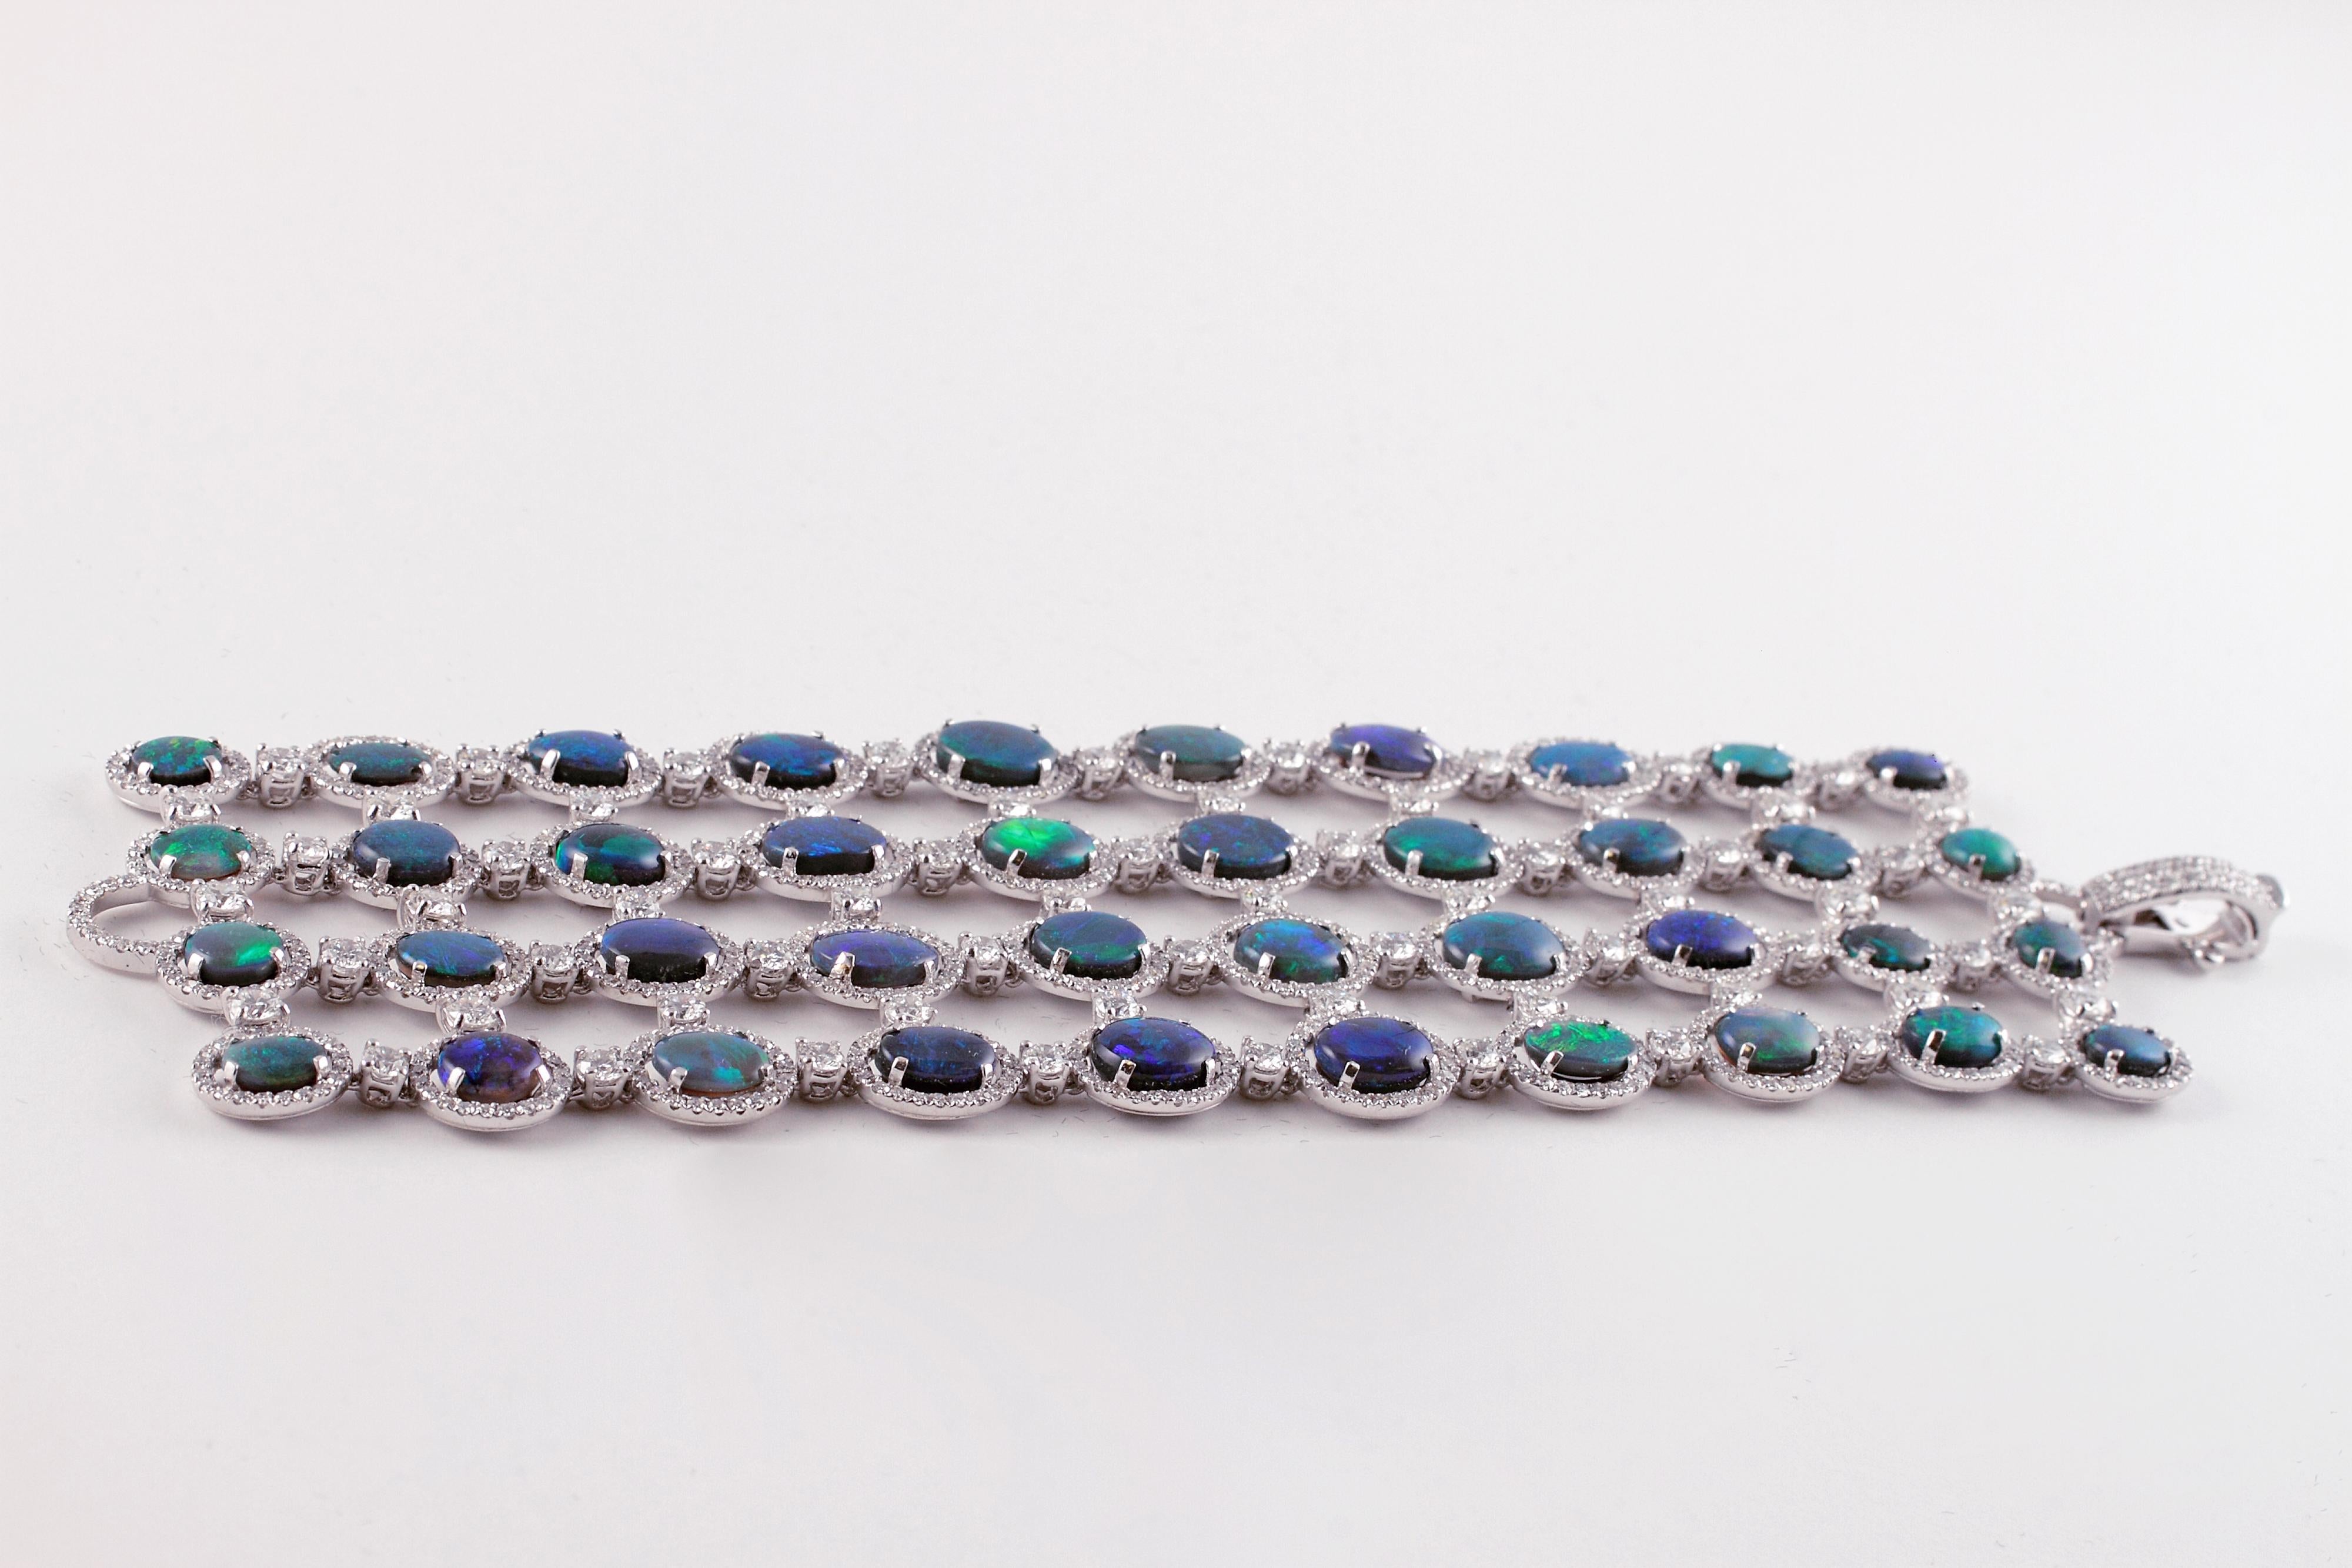 The exquisite play of color in these stunning opals is a beautiful thing to behold!  This bracelet was handcrafted in London by famed jewelry designer David Morris.  It features 4 rows of various sized and colored opals, alternating with prong and